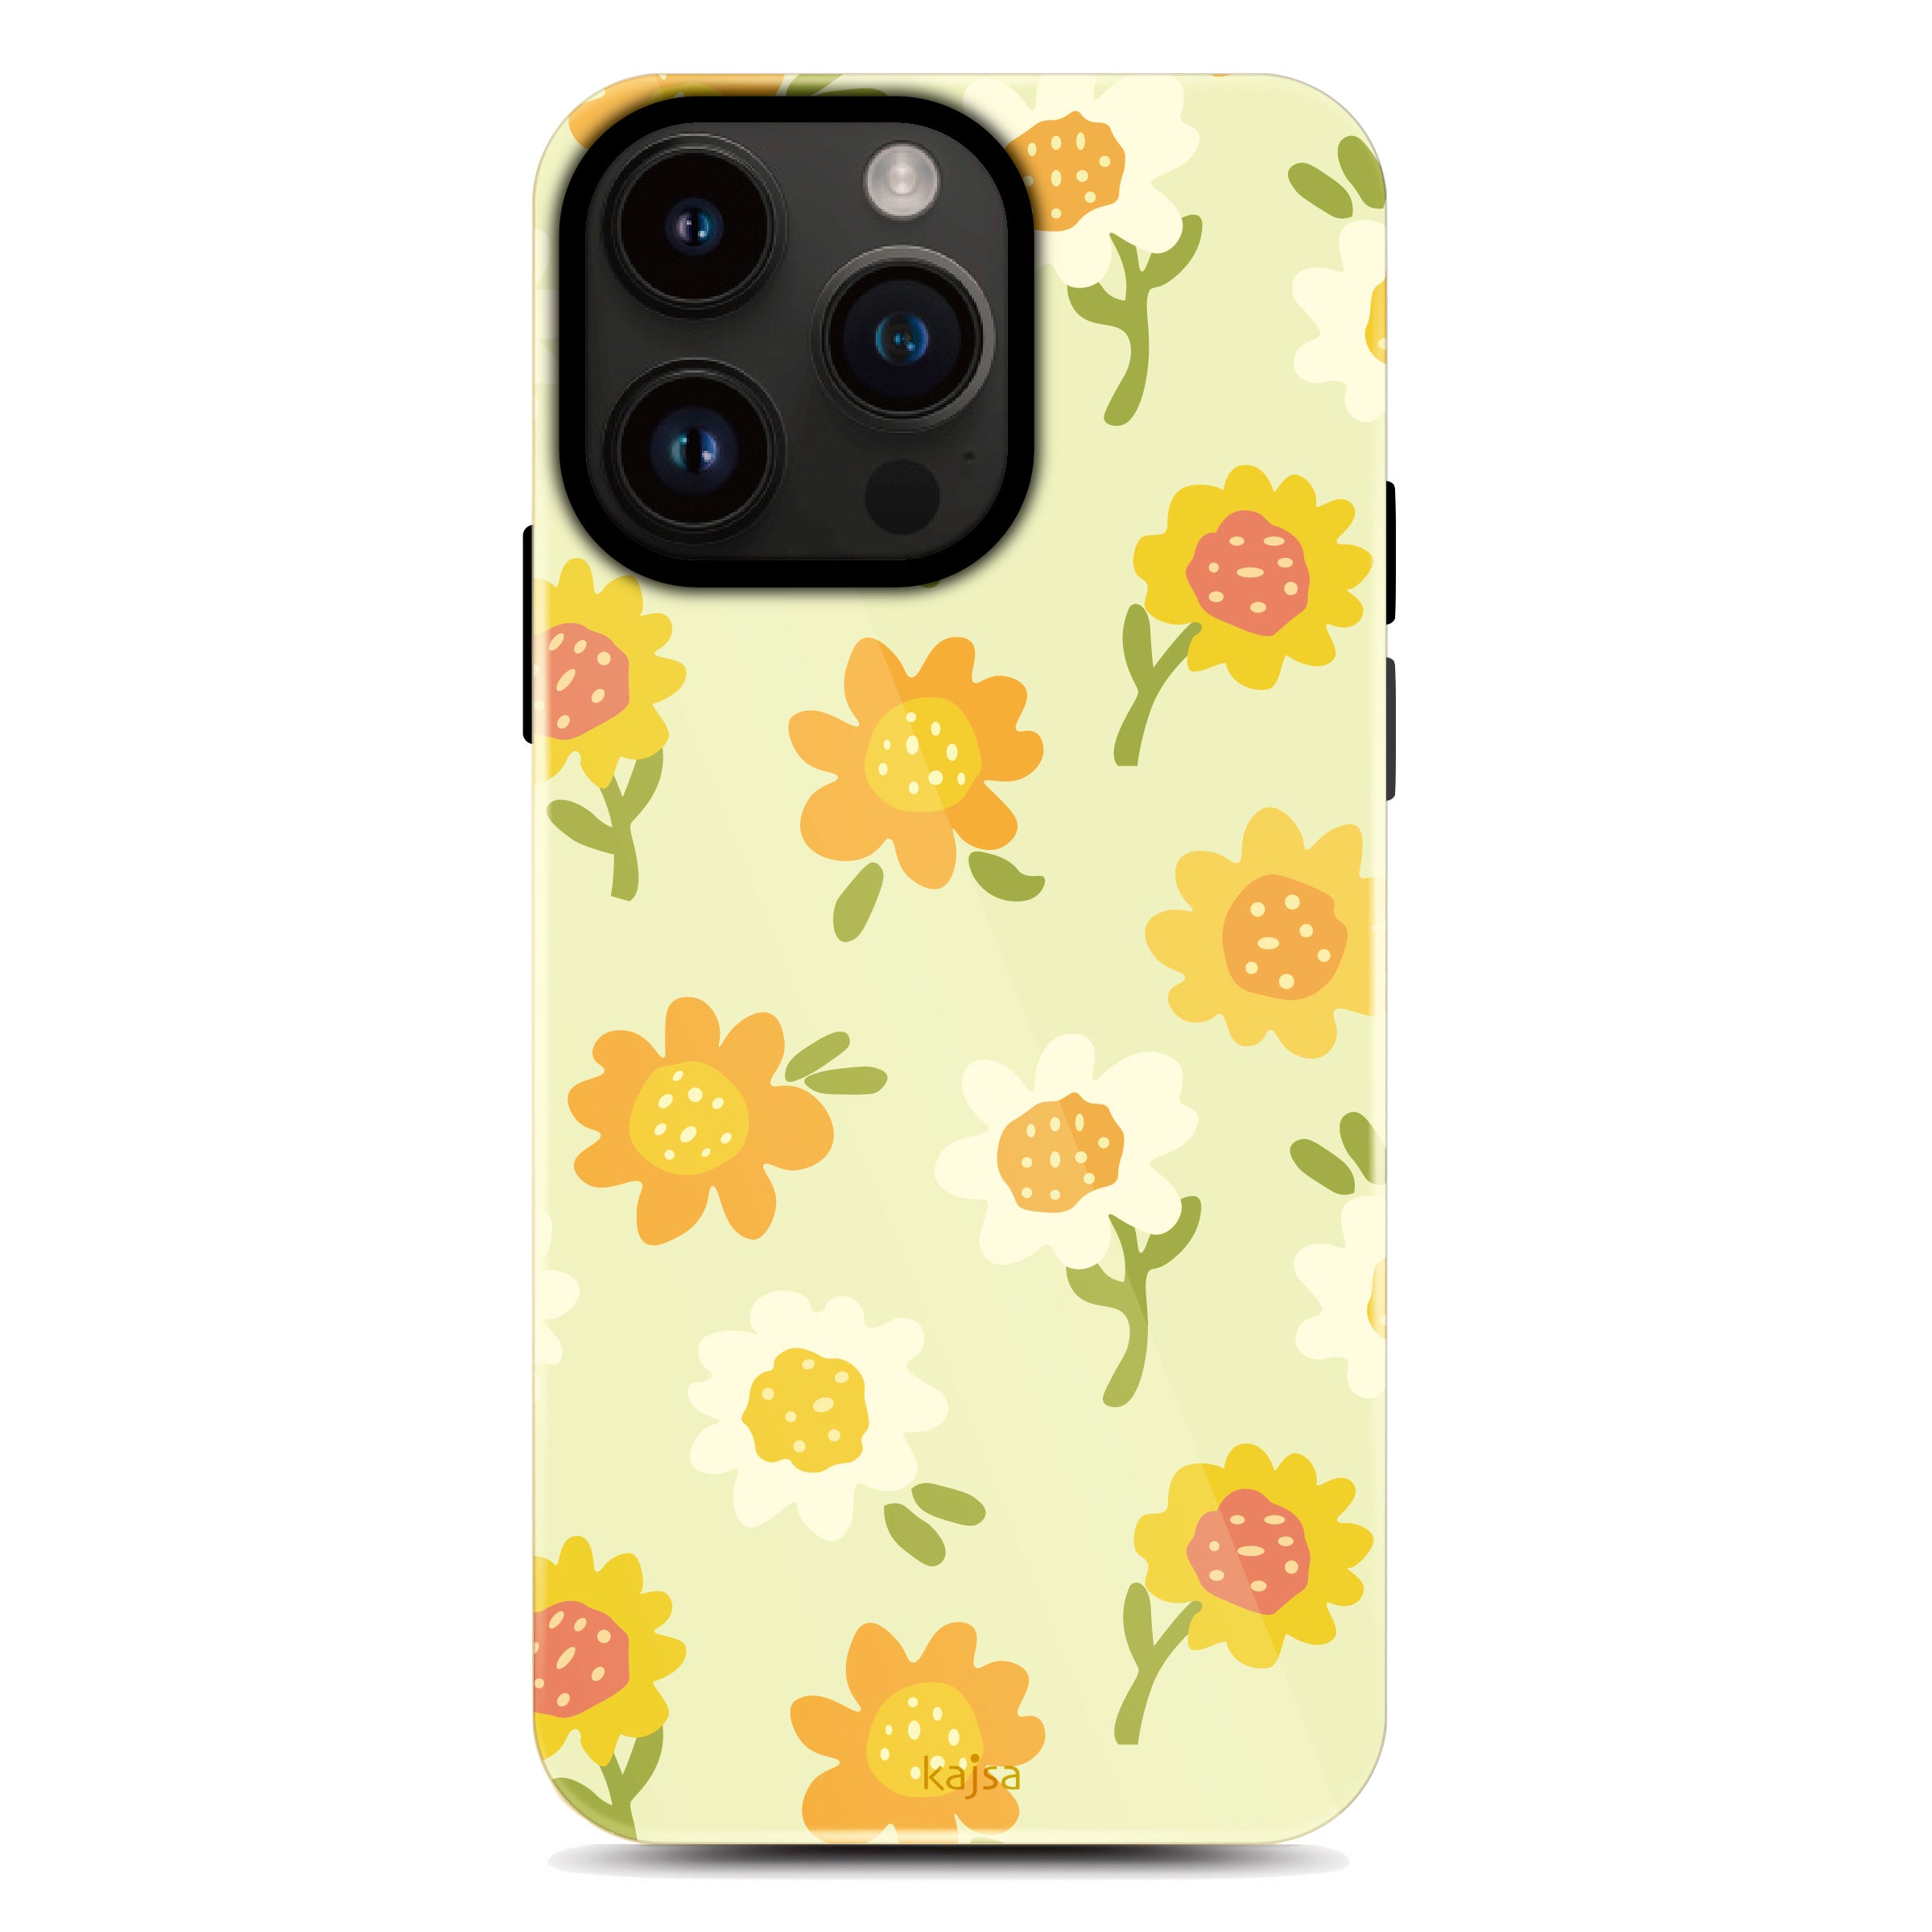 Floral Collection - Tropical Back Base for iPhone 14 (TY8)-Phone Case- phone case - phone cases- phone cover- iphone cover- iphone case- iphone cases- leather case- leather cases- DIYCASE - custom case - leather cover - hand strap case - croco pattern case - snake pattern case - carbon fiber phone case - phone case brand - unique phone case - high quality - phone case brand - protective case - buy phone case hong kong - online buy phone case - iphone‎手機殼 - 客製化手機殼 - samsung ‎手機殼 - 香港手機殼 - 買電話殼